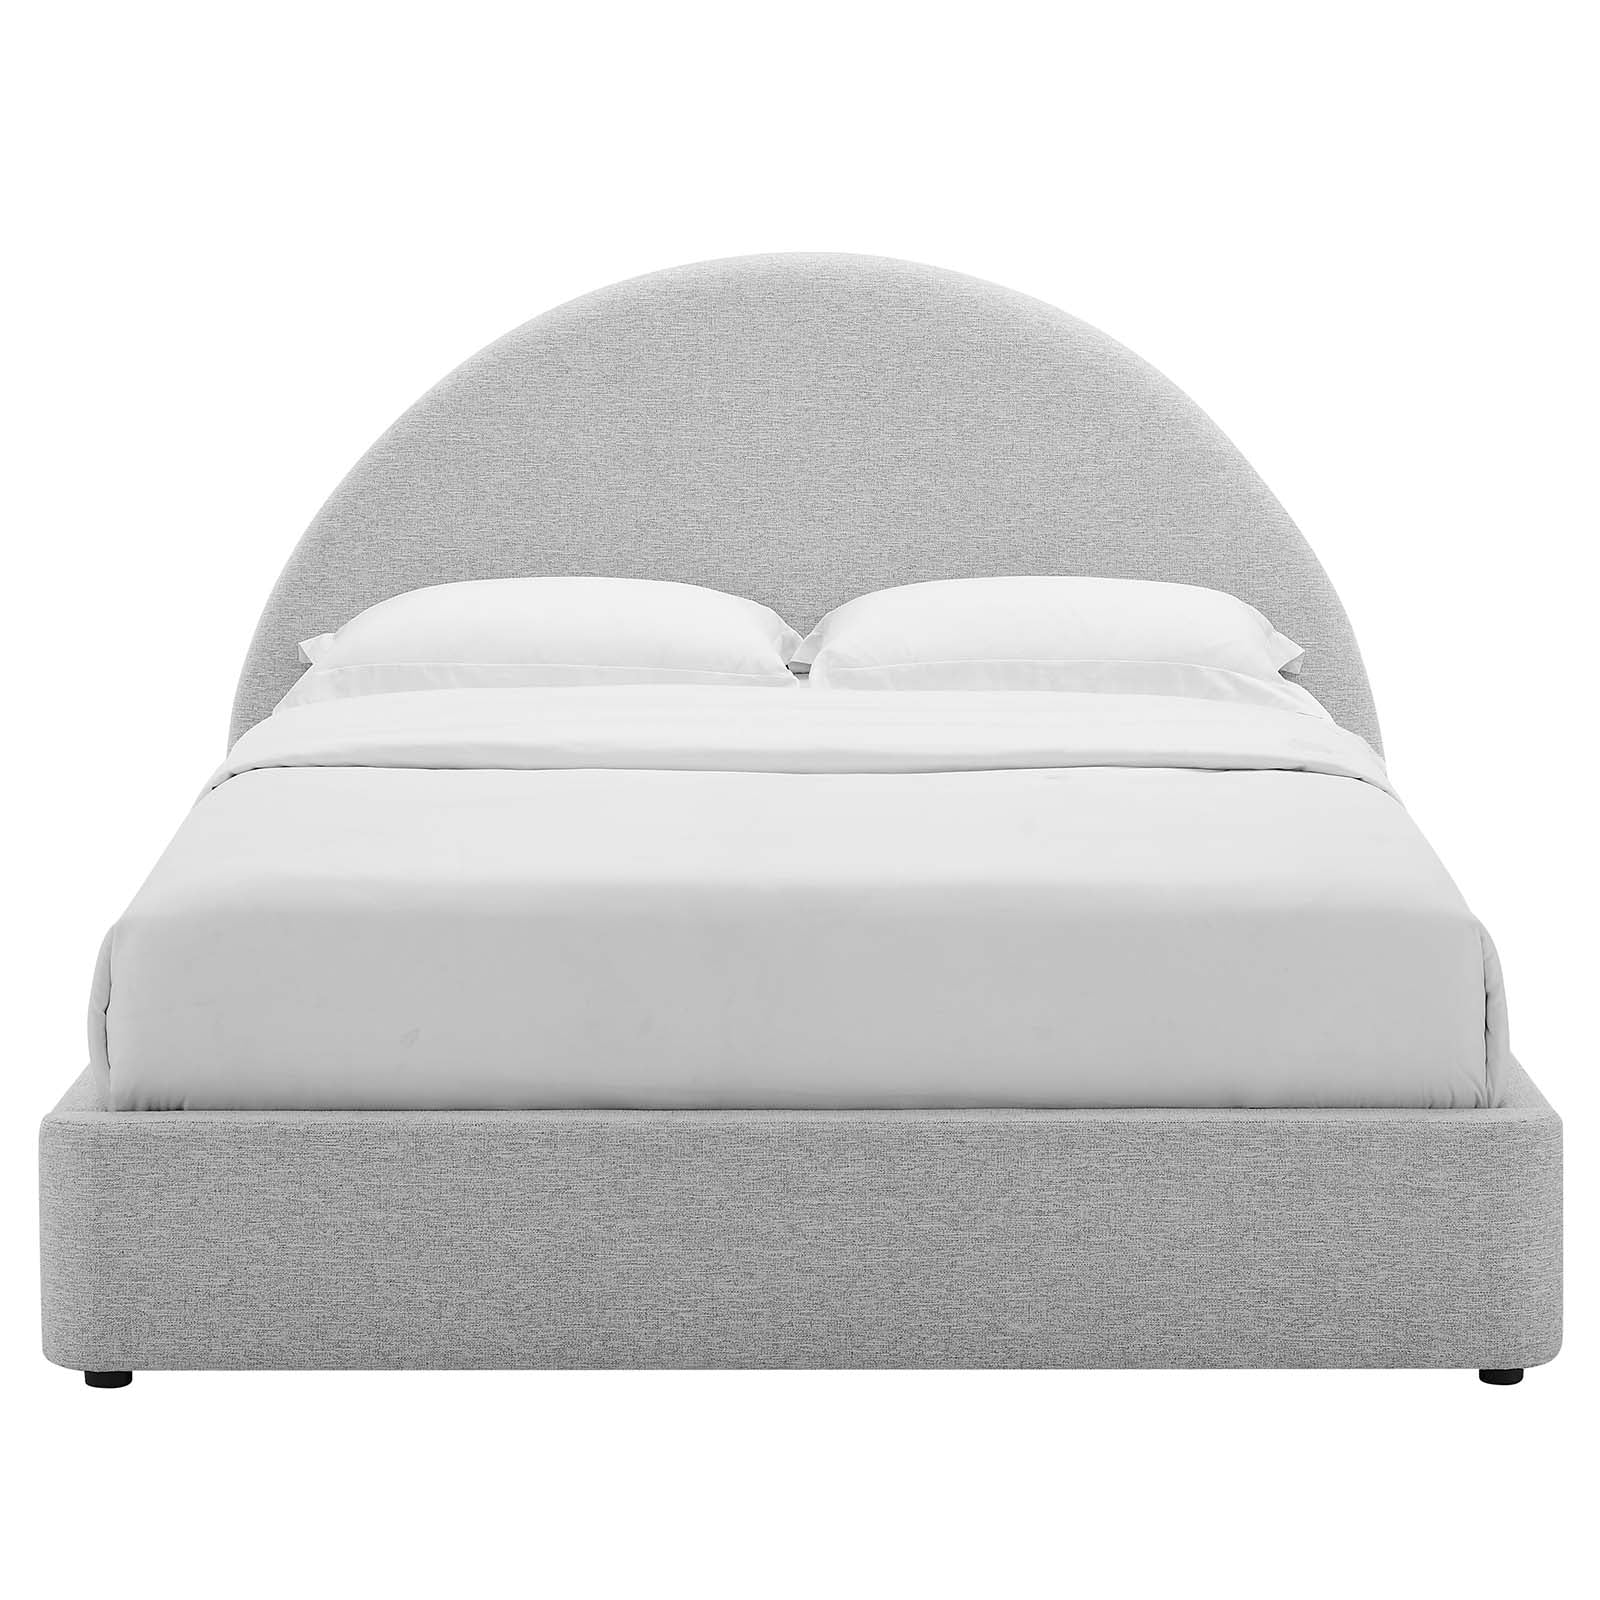 Cleo Arched Platform Bed - Heathered Weave Light Gray